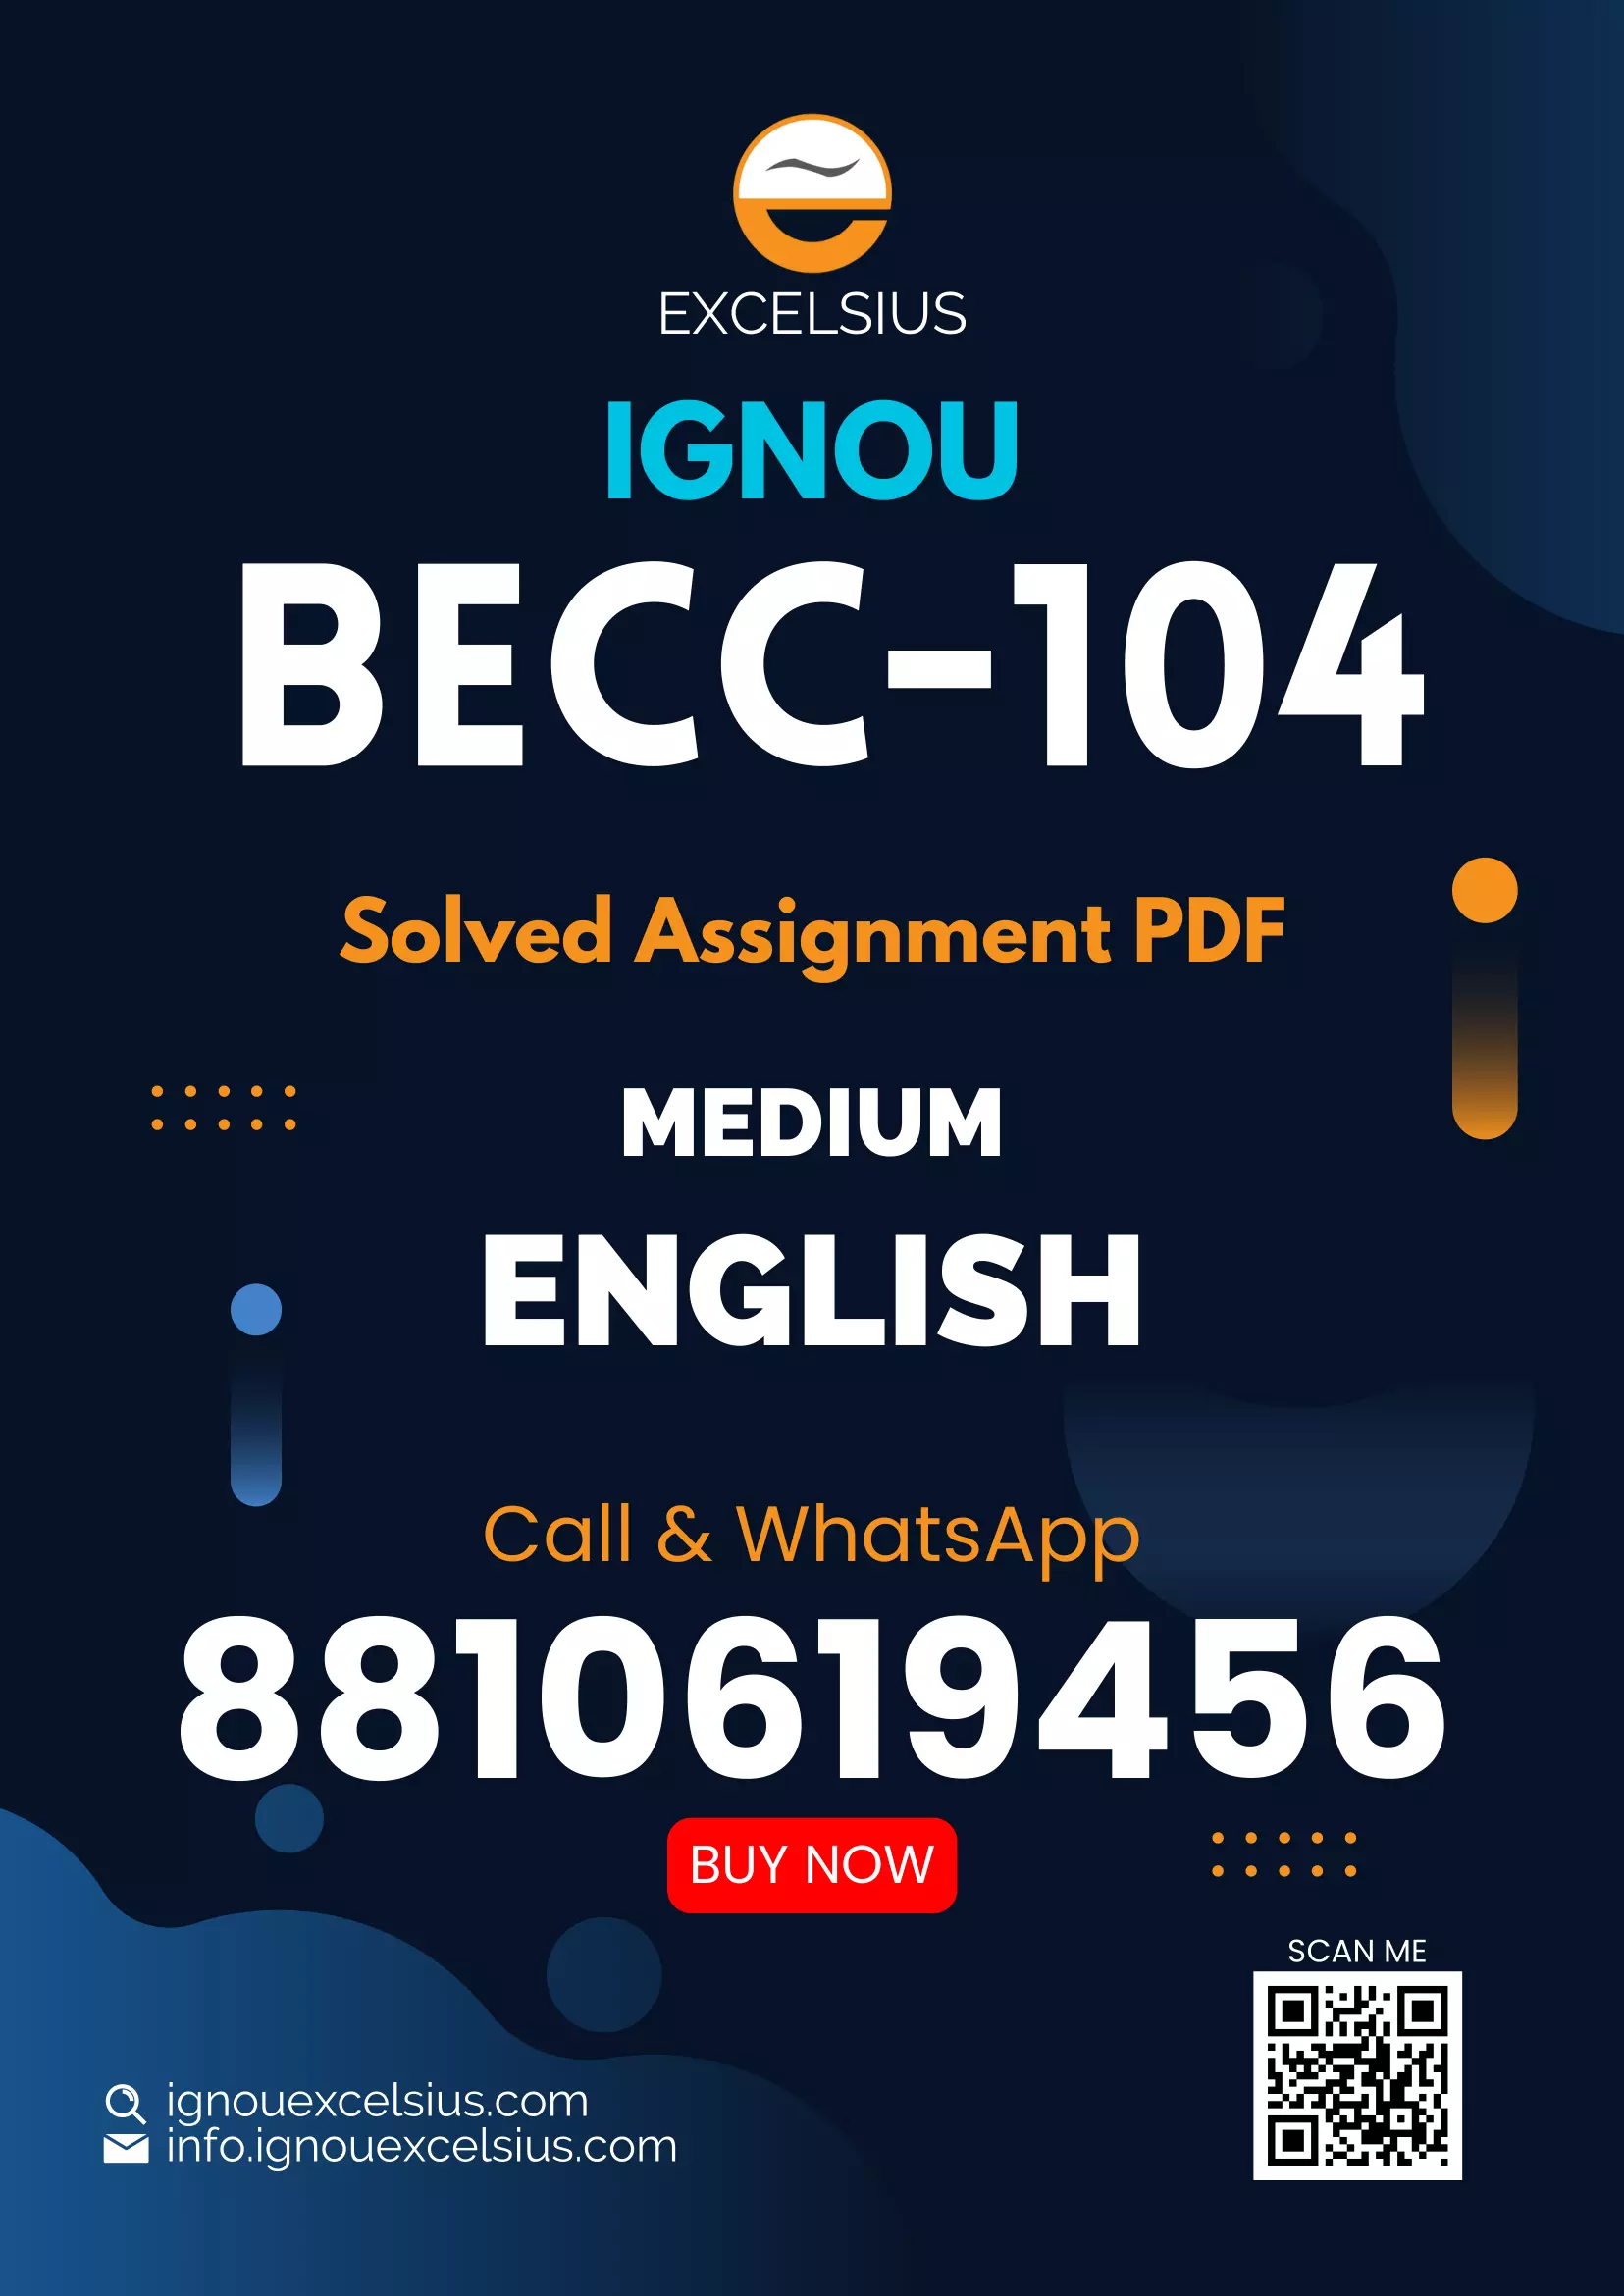 IGNOU BECC-104 - Mathematical Methods for Economics-II, Latest Solved Assignment-July 2022 – January 2023